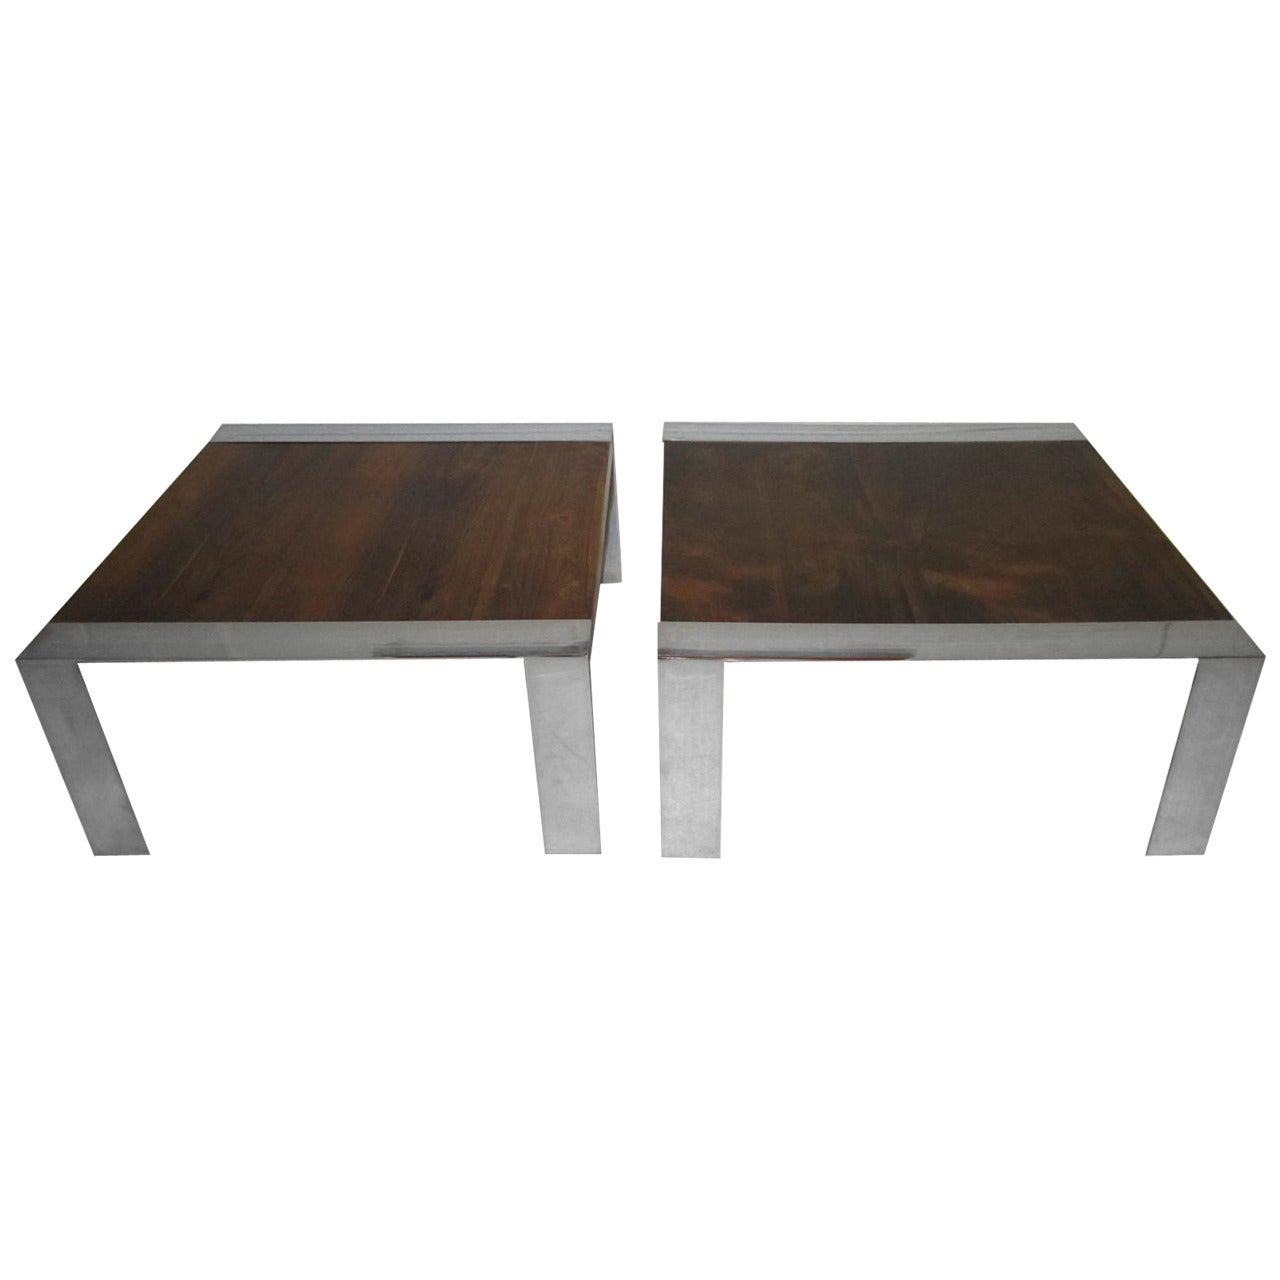 Stunning Pair of Milo Baughman Style Rosewood and Chrome Coffee Tables For Sale